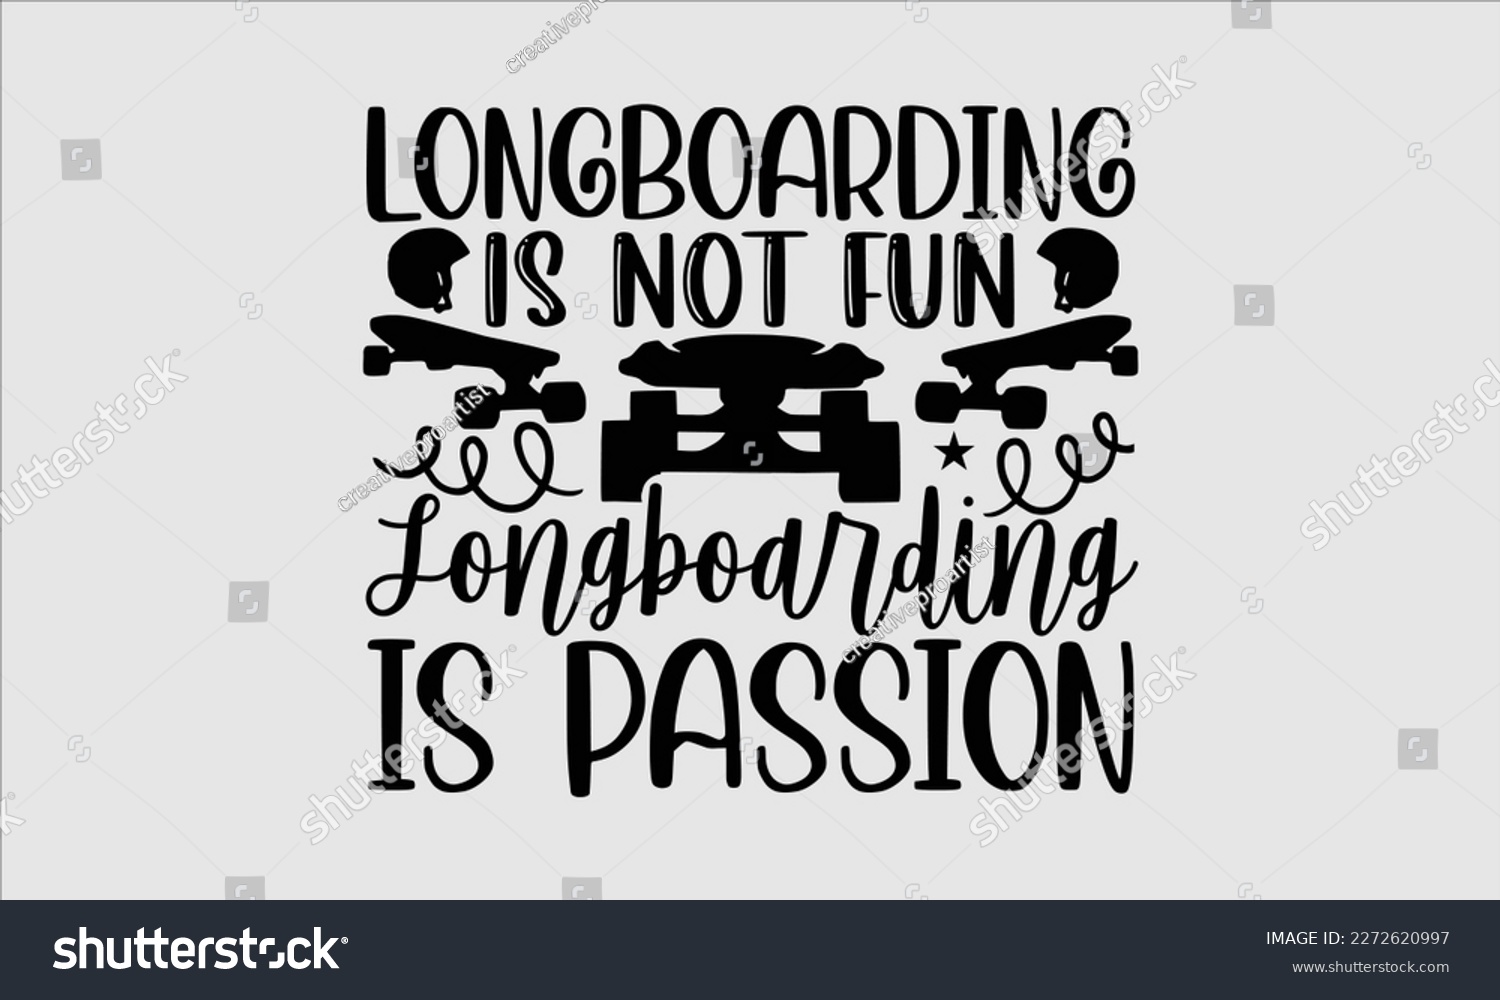 SVG of Longboarding is not fun longboarding is passion- Longboarding T- shirt Design, Hand drawn lettering phrase, Illustration for prints on t-shirts and bags, posters, funny eps files, svg cricut svg